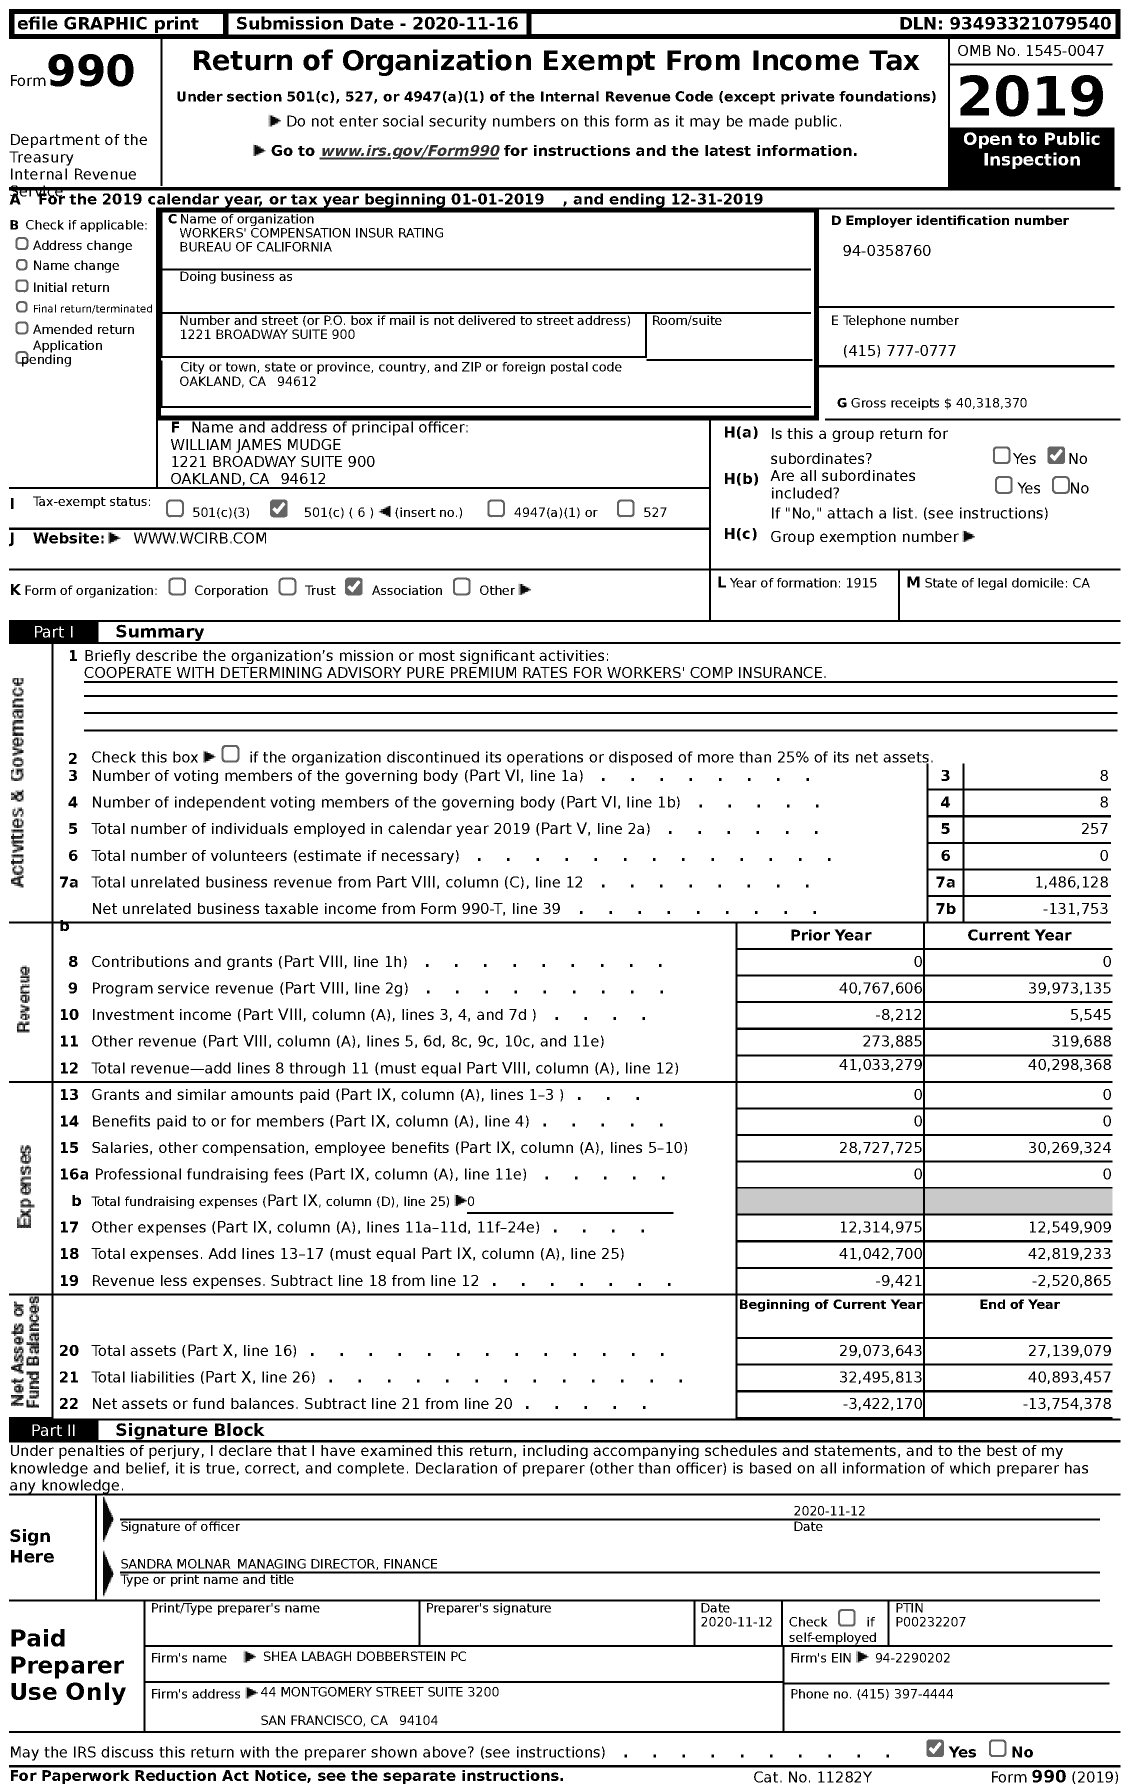 Image of first page of 2019 Form 990 for Workers' Compensation Insur Rating Bureau of California